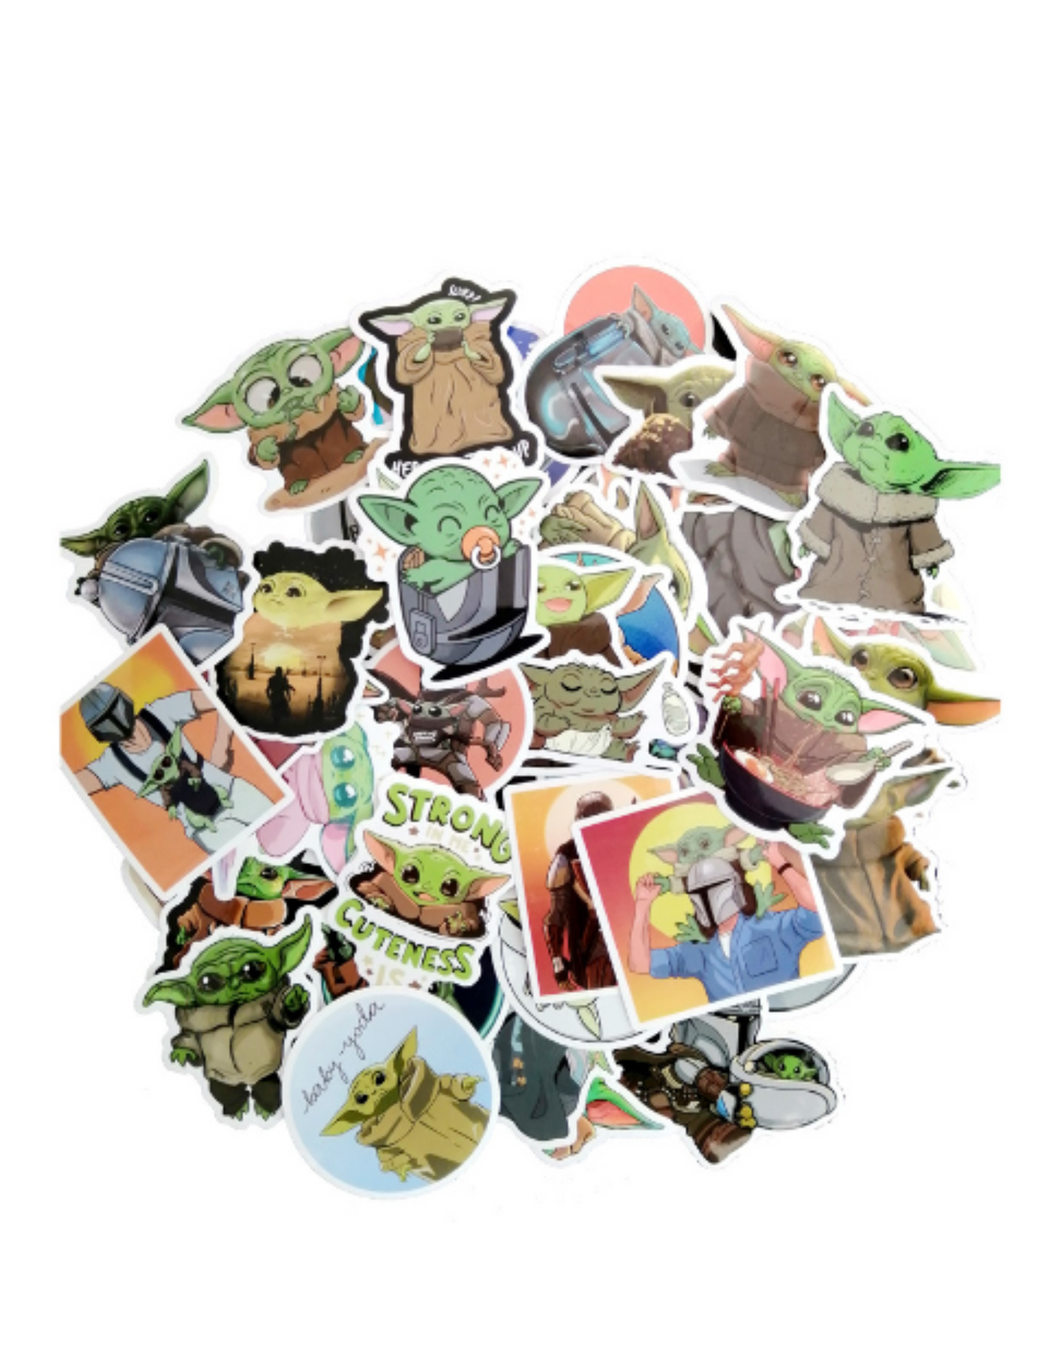 Star Wars Mandalorian and Baby Yoda Deluxe Sticker Pack